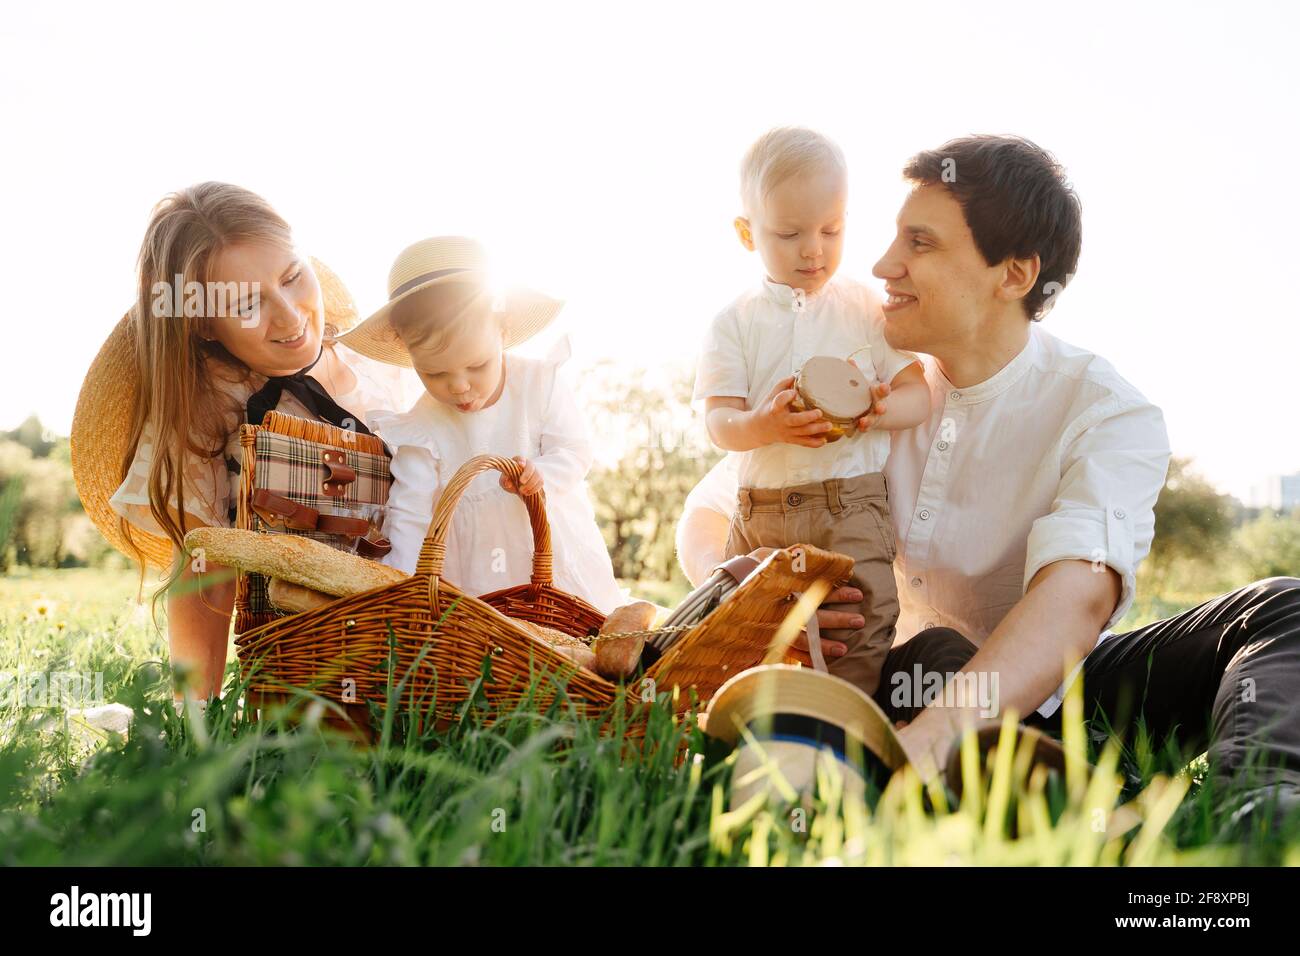 Family child parents with children at a picnic. Stock Photo